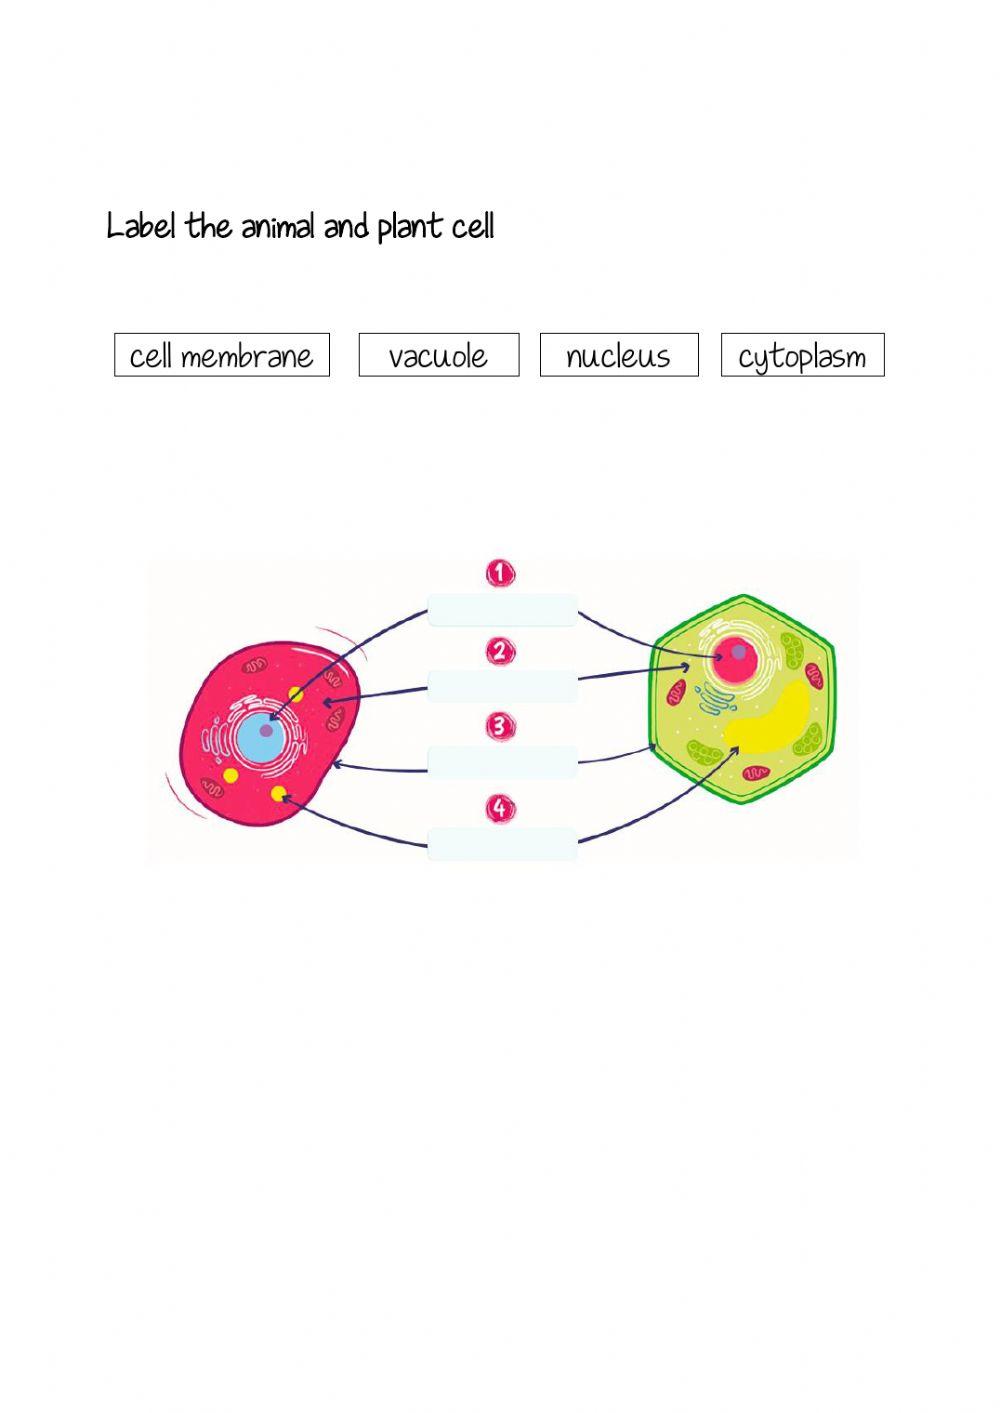 Animal and plan cell